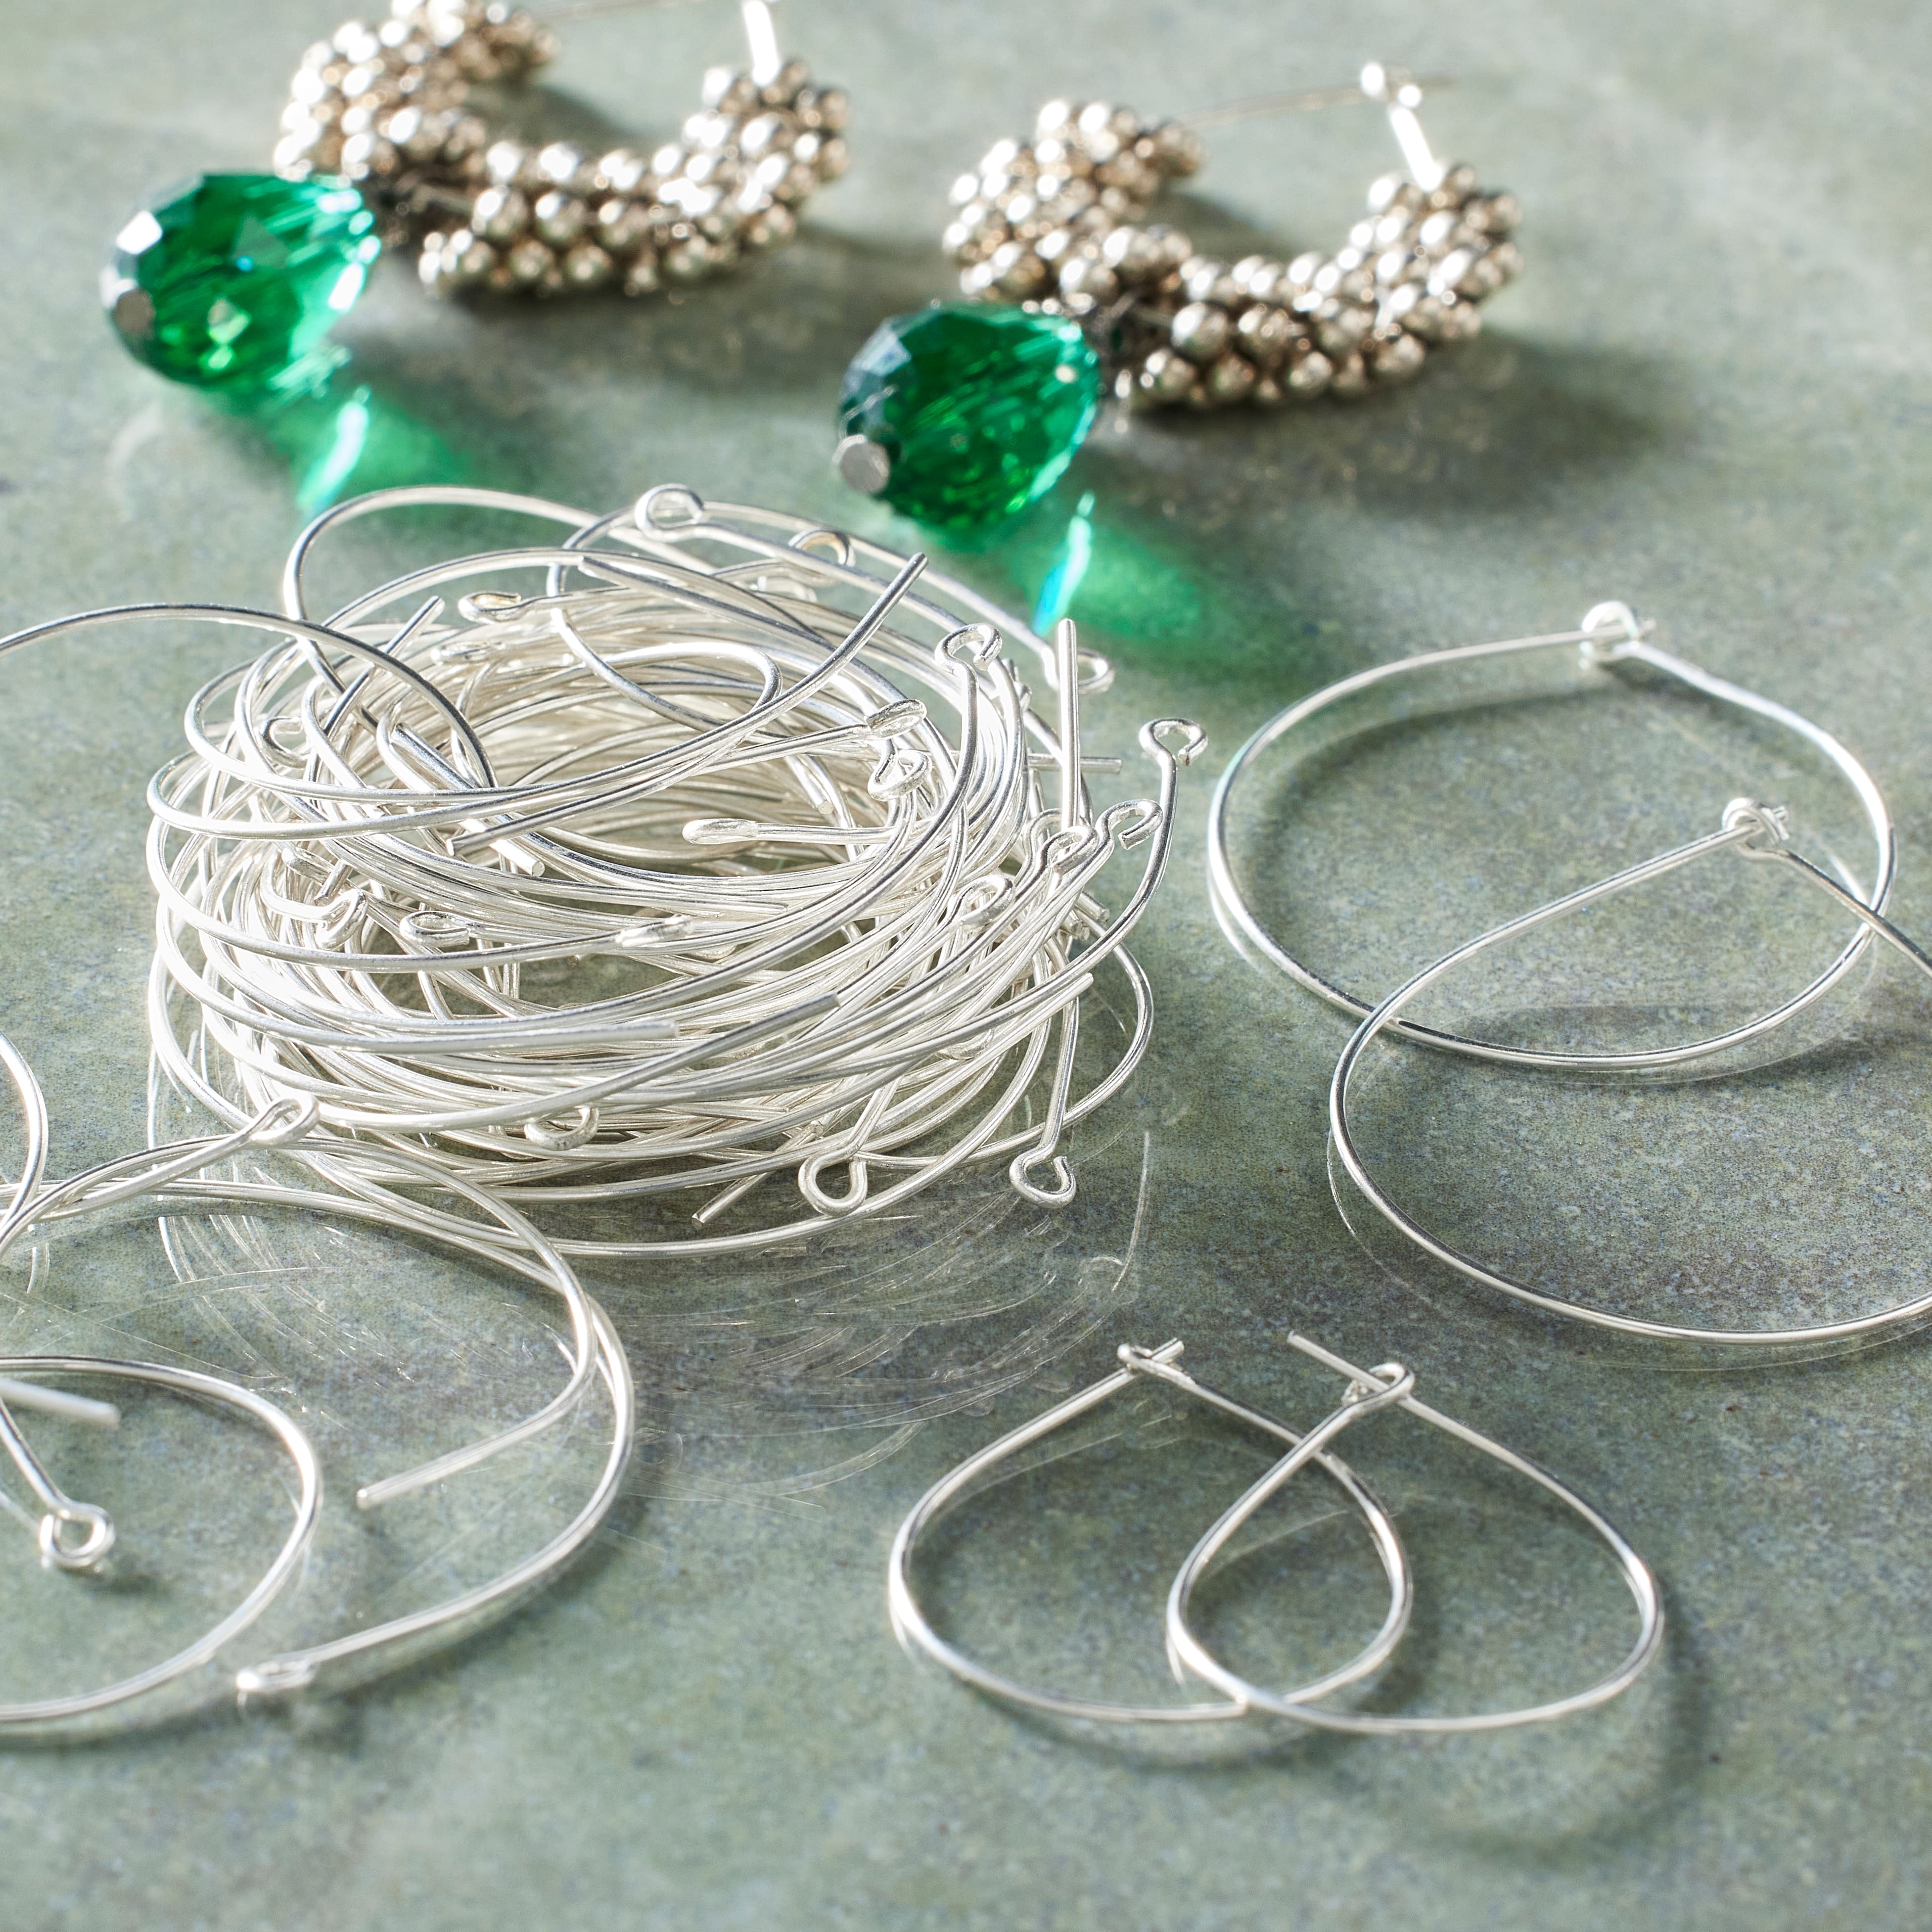 How to Attach an Earwire to an Endless Beading Hoop